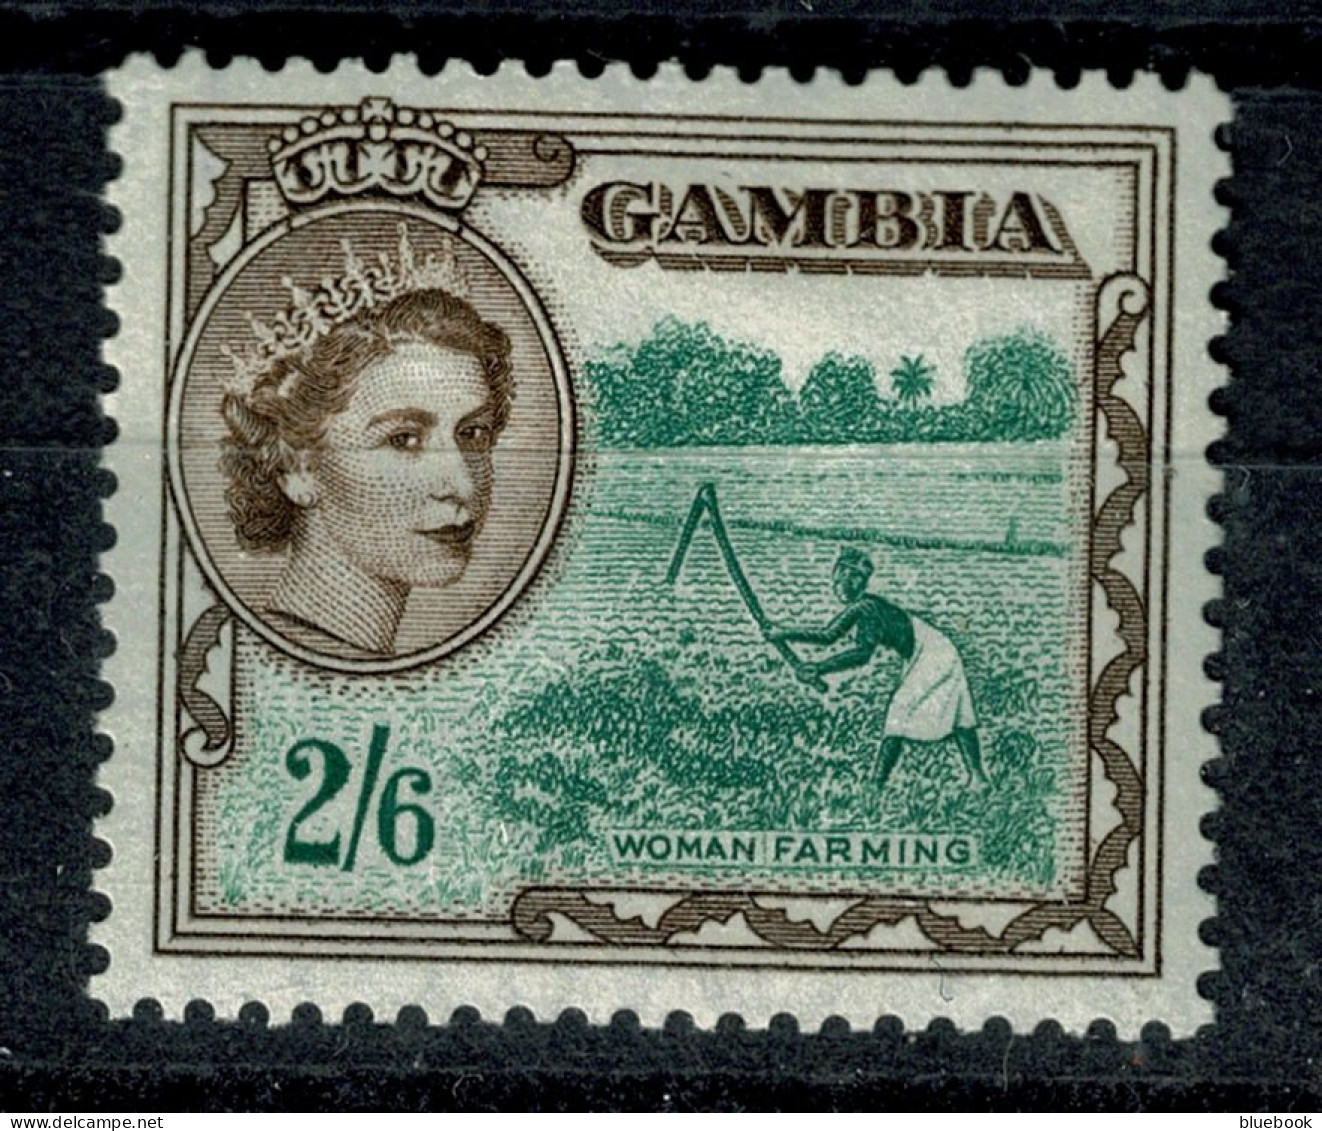 Ref 1640 - Gambia 1938 KGVI - 2s/6d Stamp Woman Farming - Lightly Mounted Mint SG 181 - Gambia (...-1964)